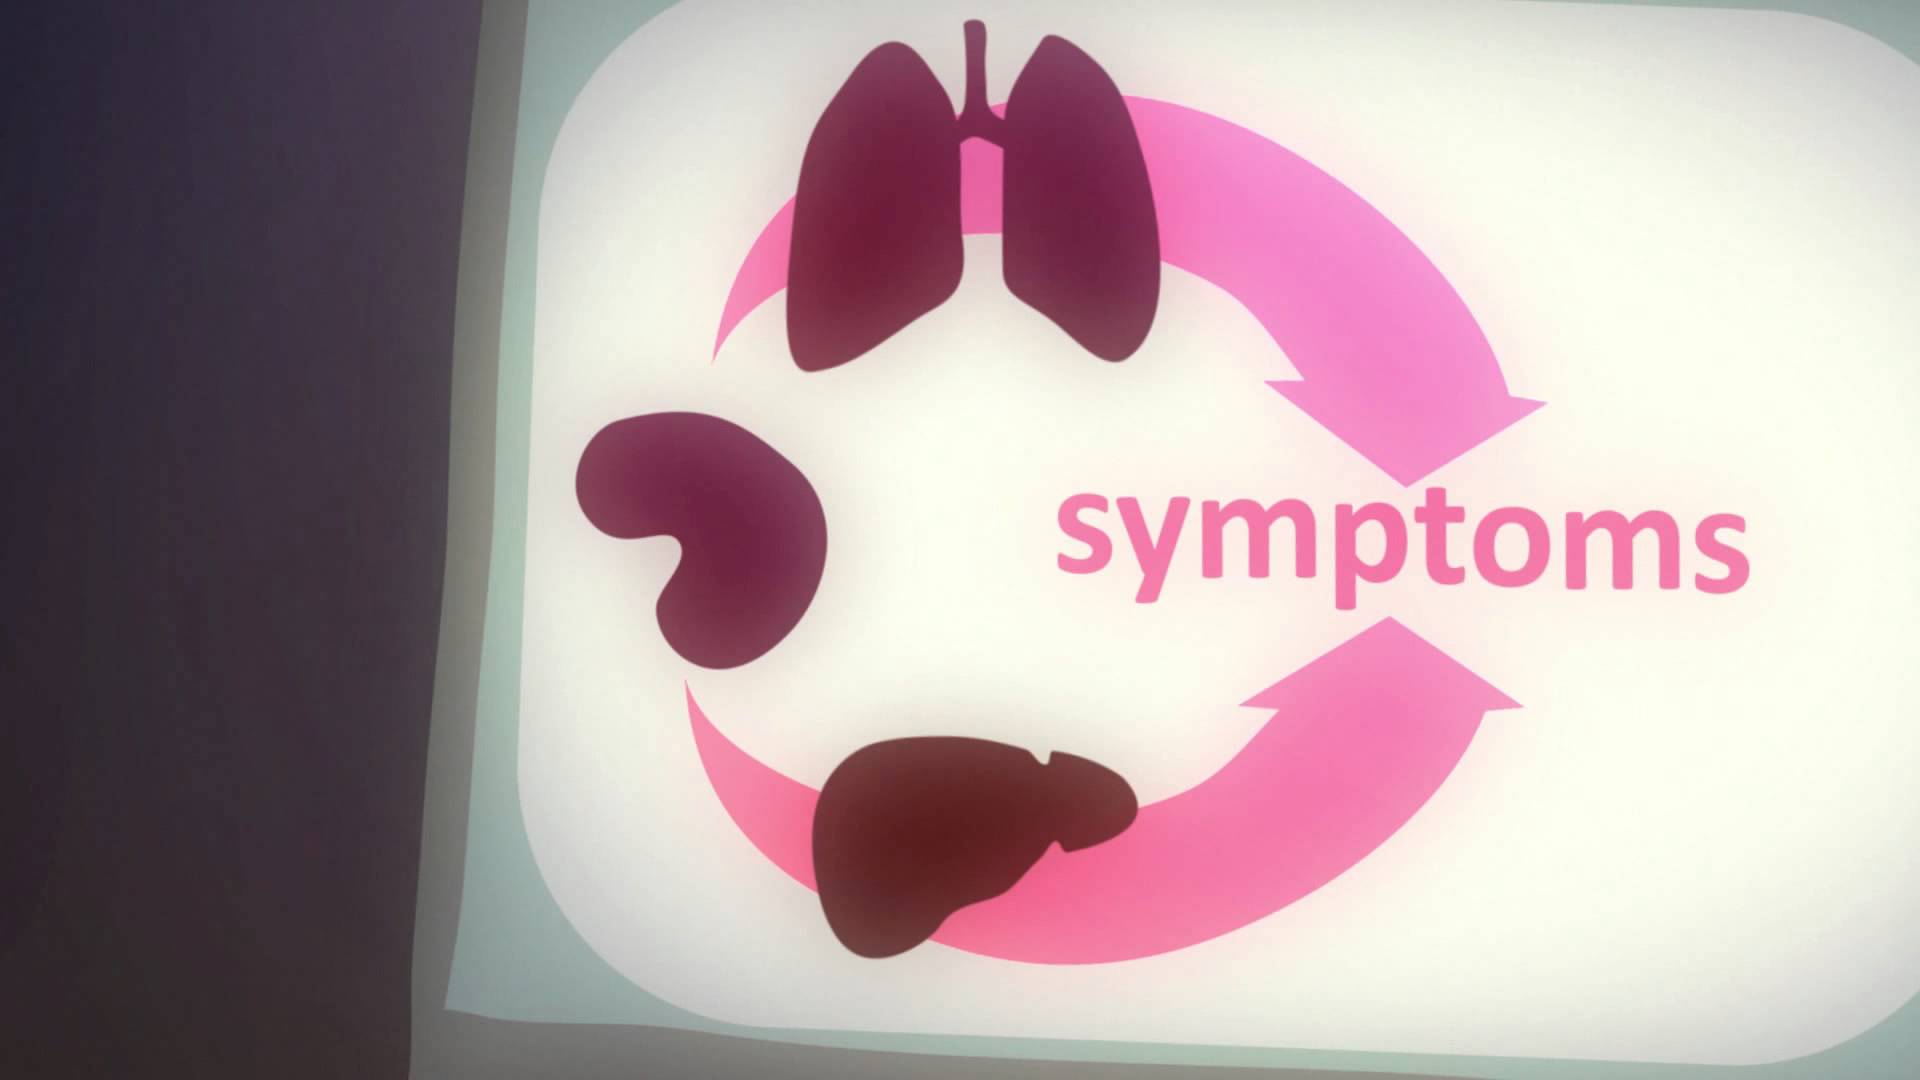 Lungs, kidney, and liver with text "symptoms."